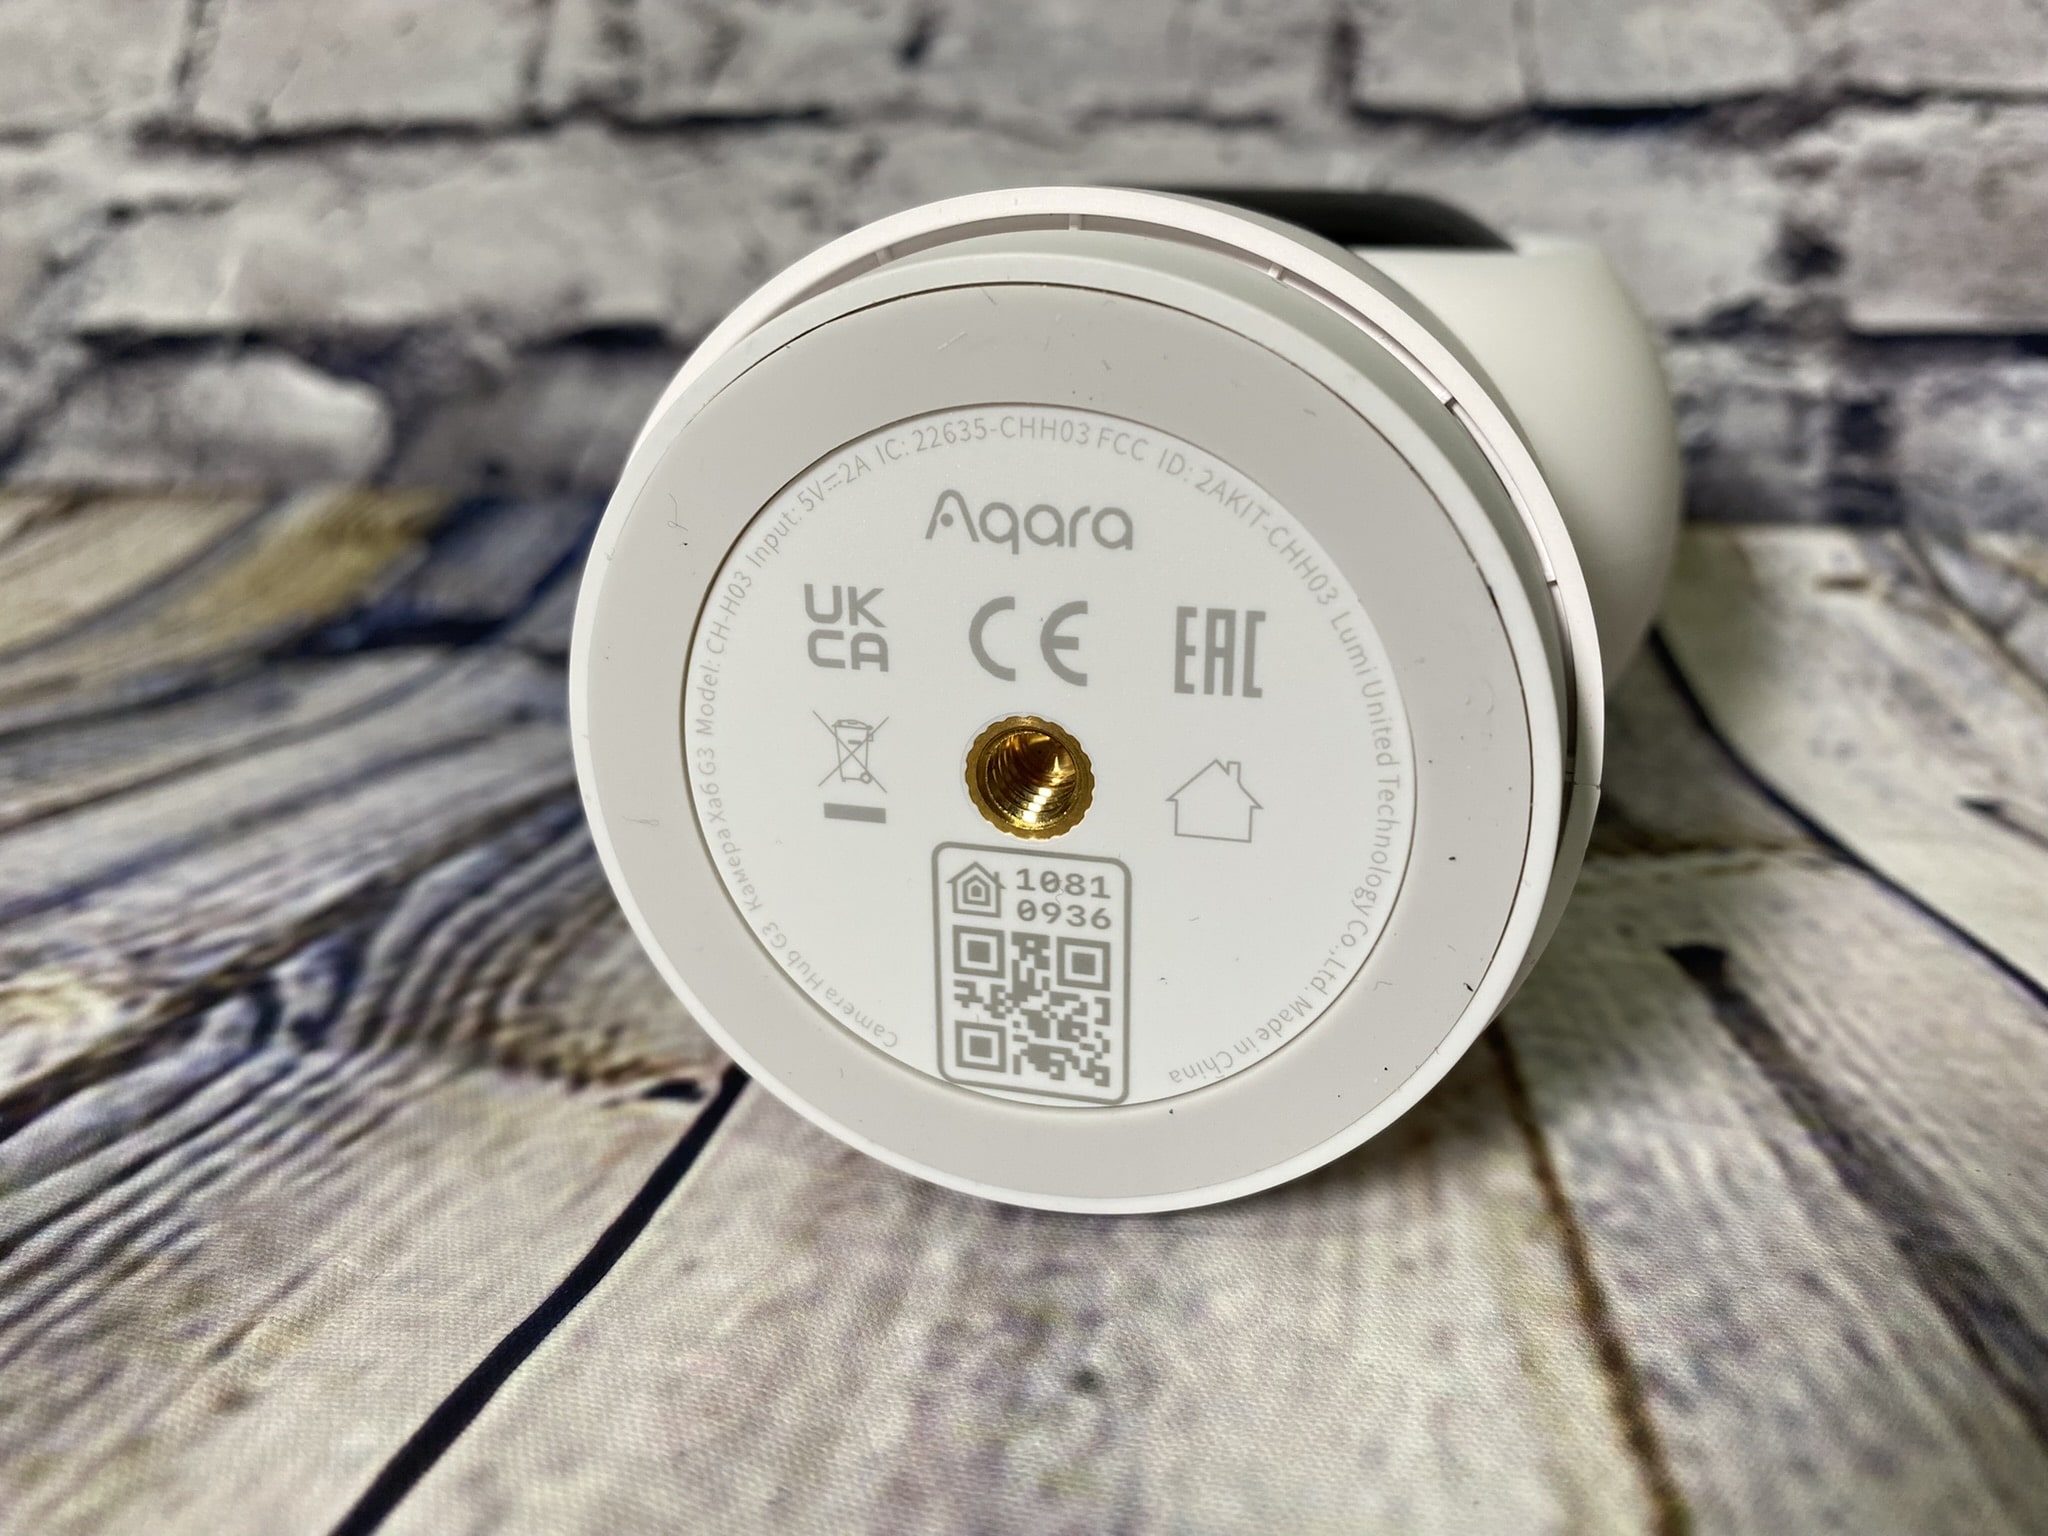 Aqara Camera Hub G3 in test - Smart Home with gesture control, tracking and  much more!